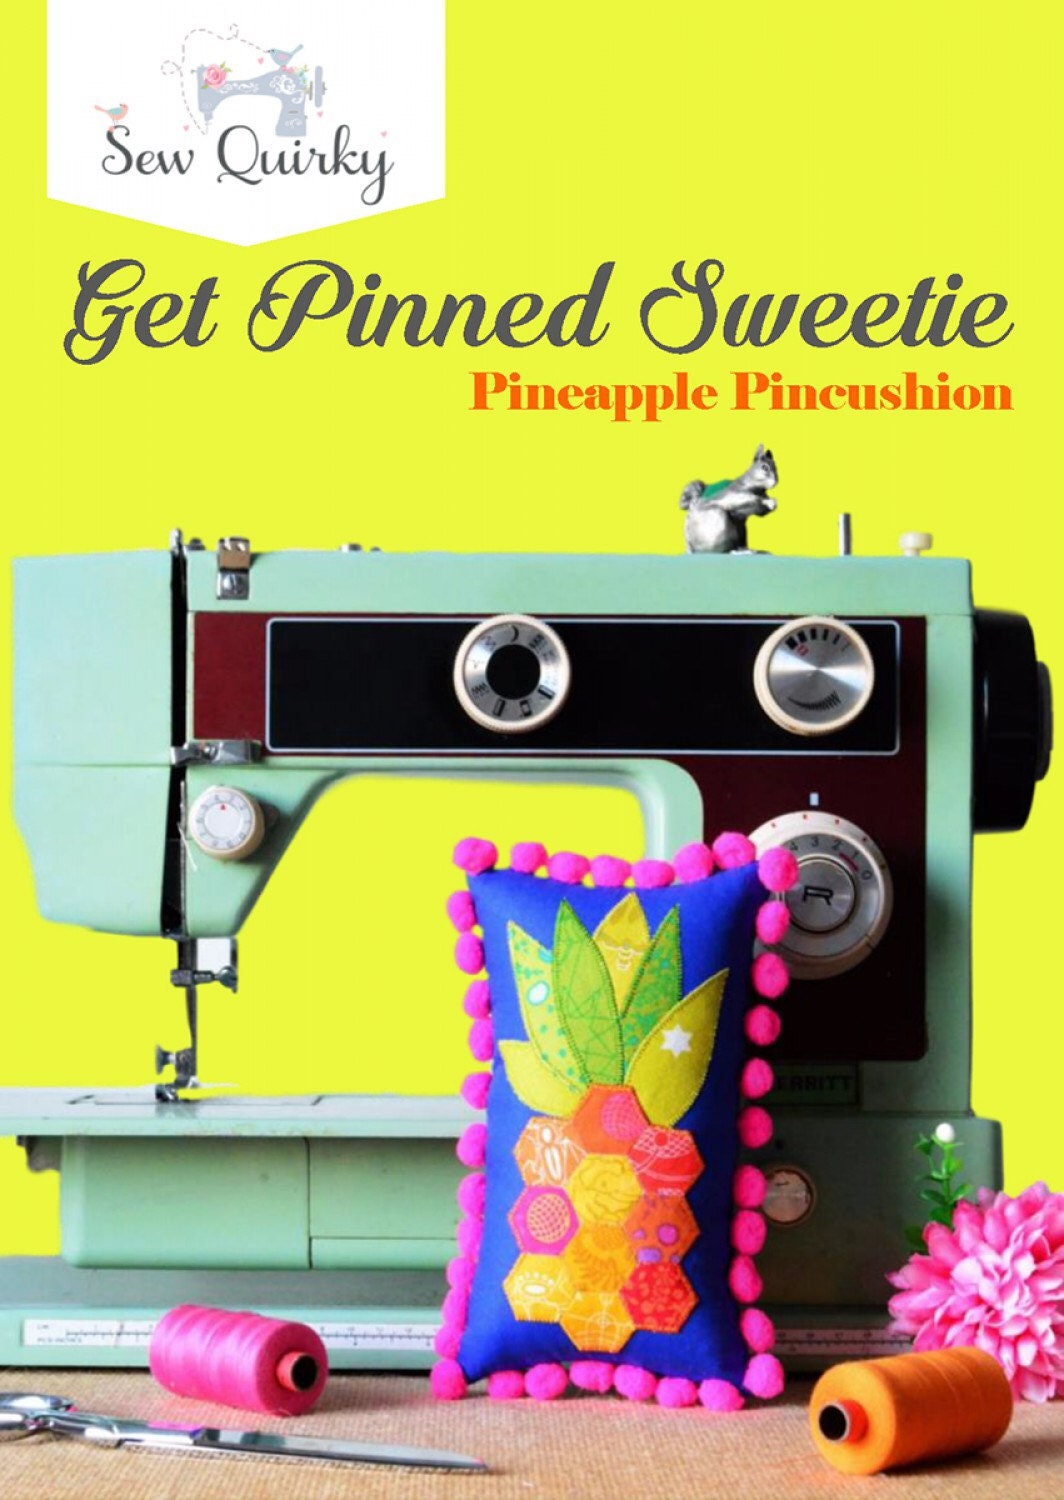 Get Pinned Sweetie Pineapple Pincushion - Sew Quirky - Appliqué Pattern - Pincushion Pattern